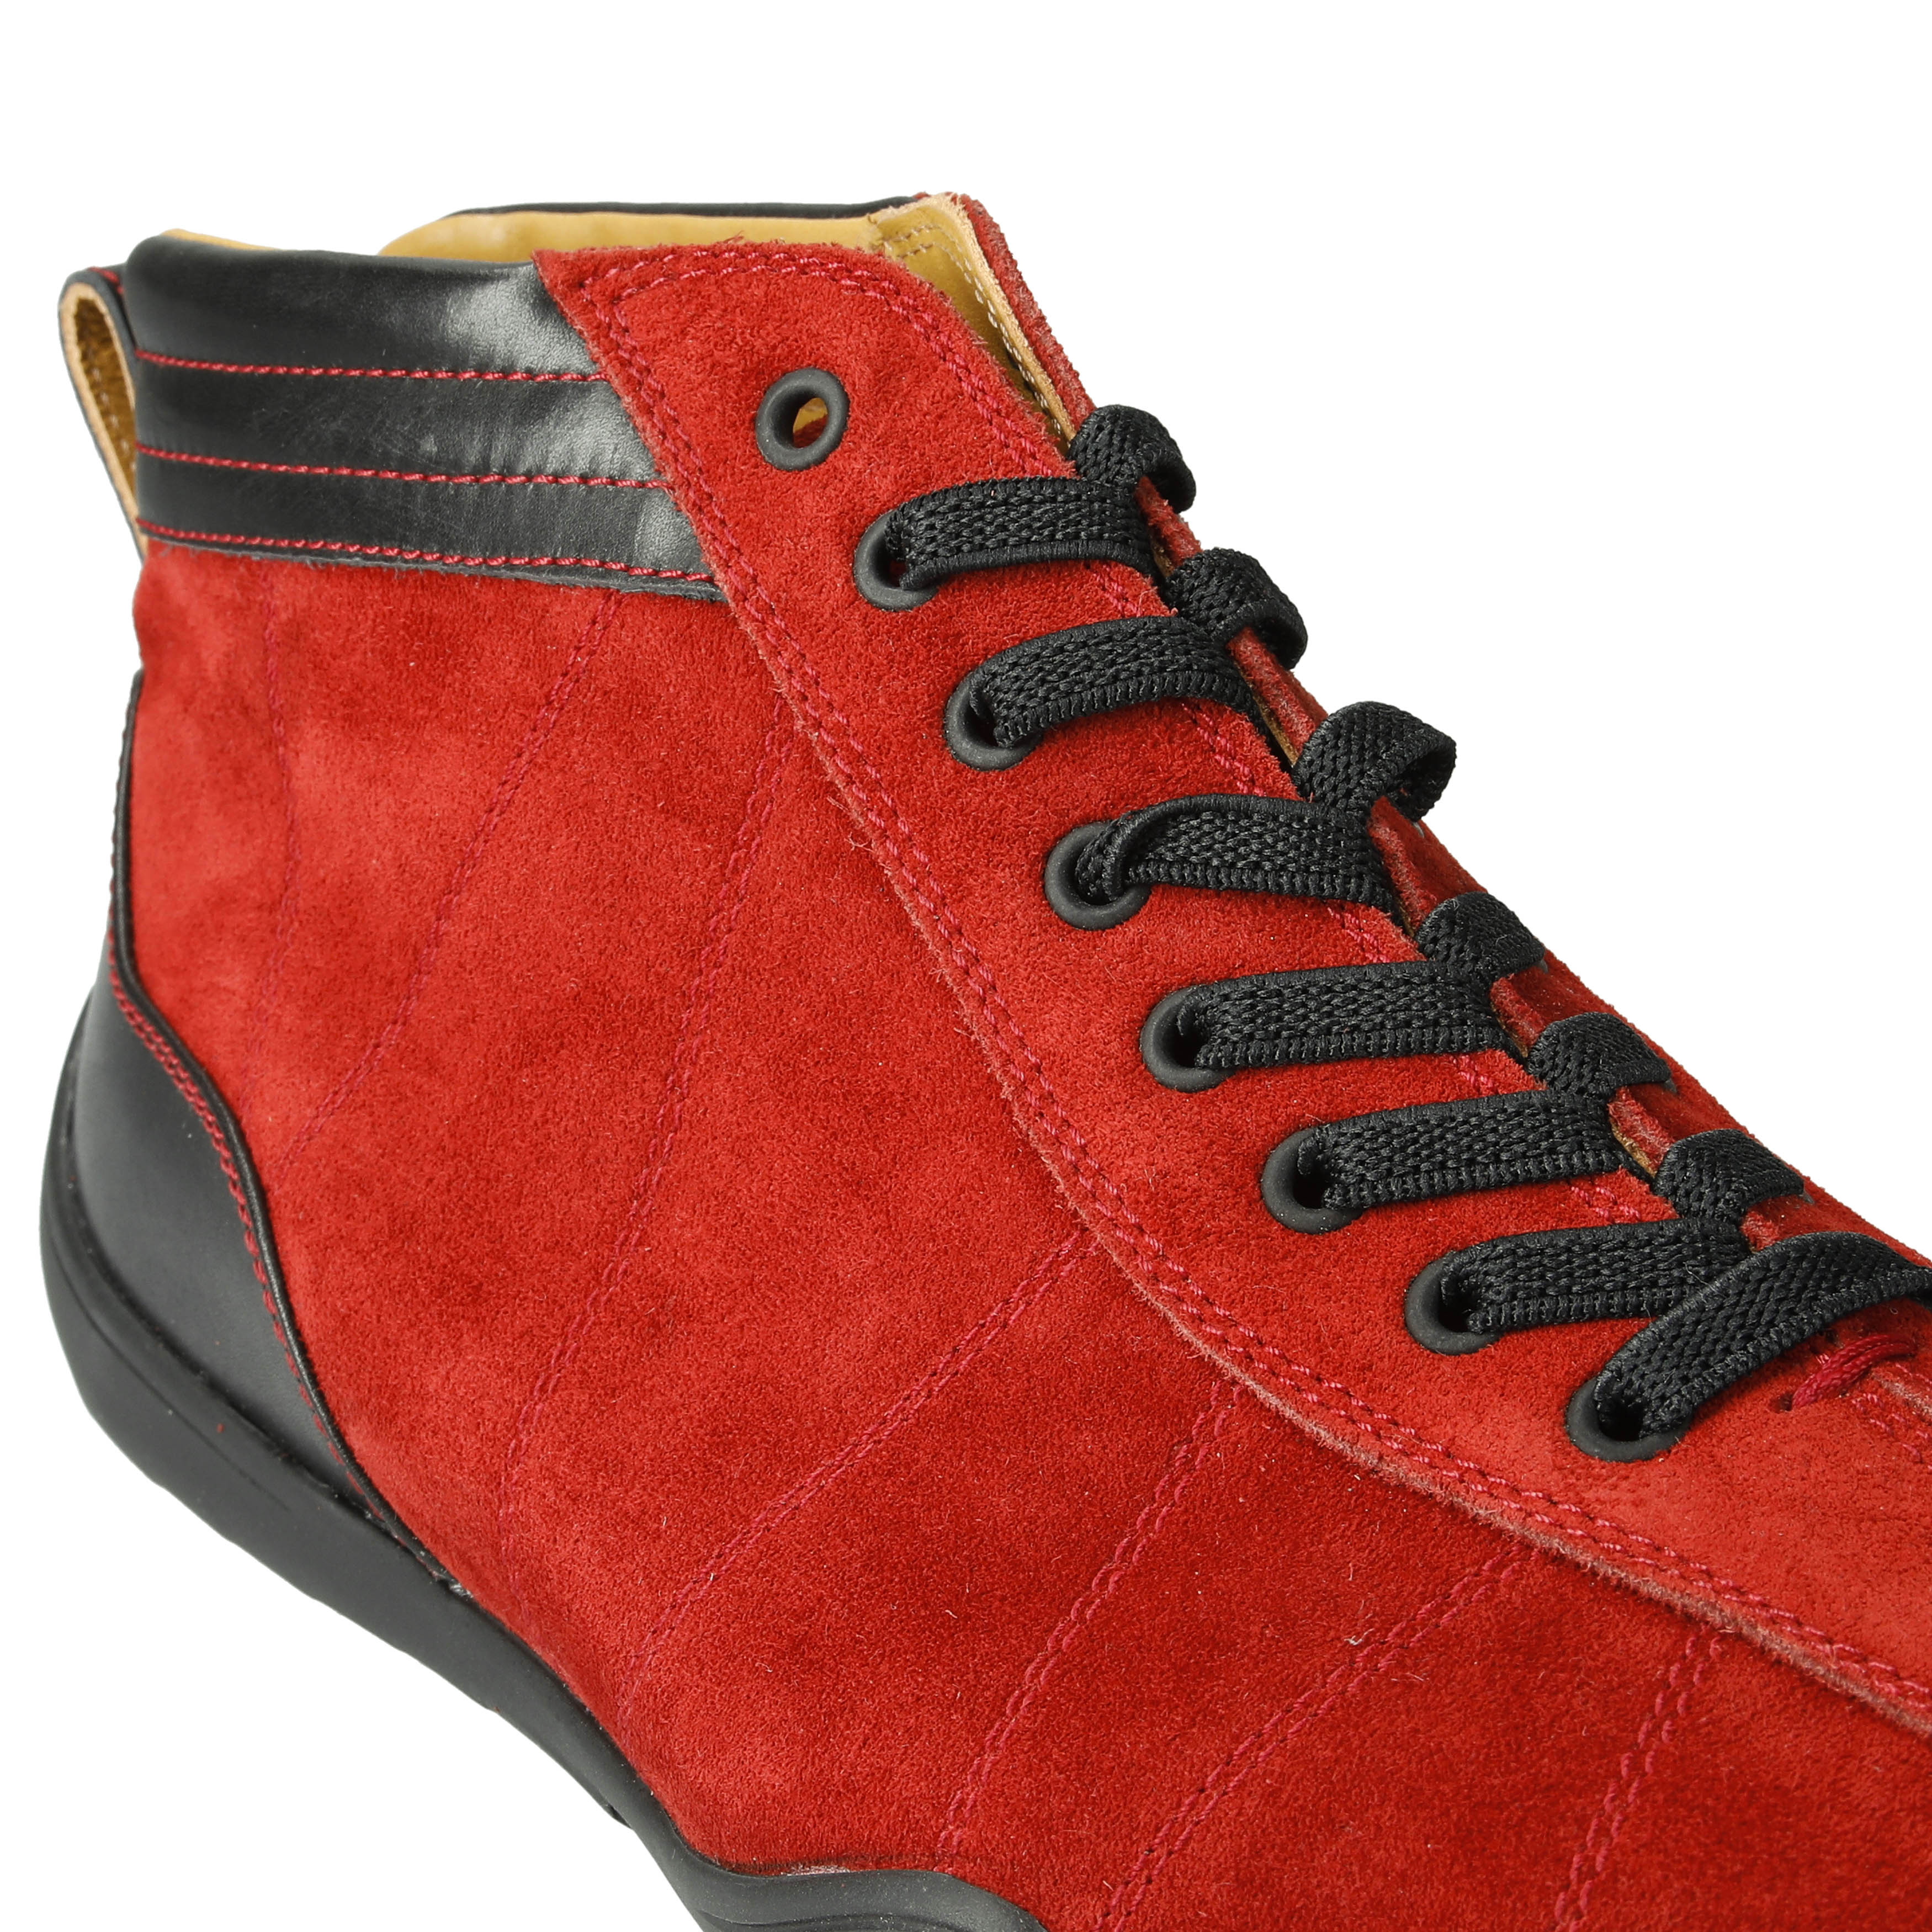 GRAND PRIX HI-TOP / Ignition Red［お取り寄せ品］イメージ3